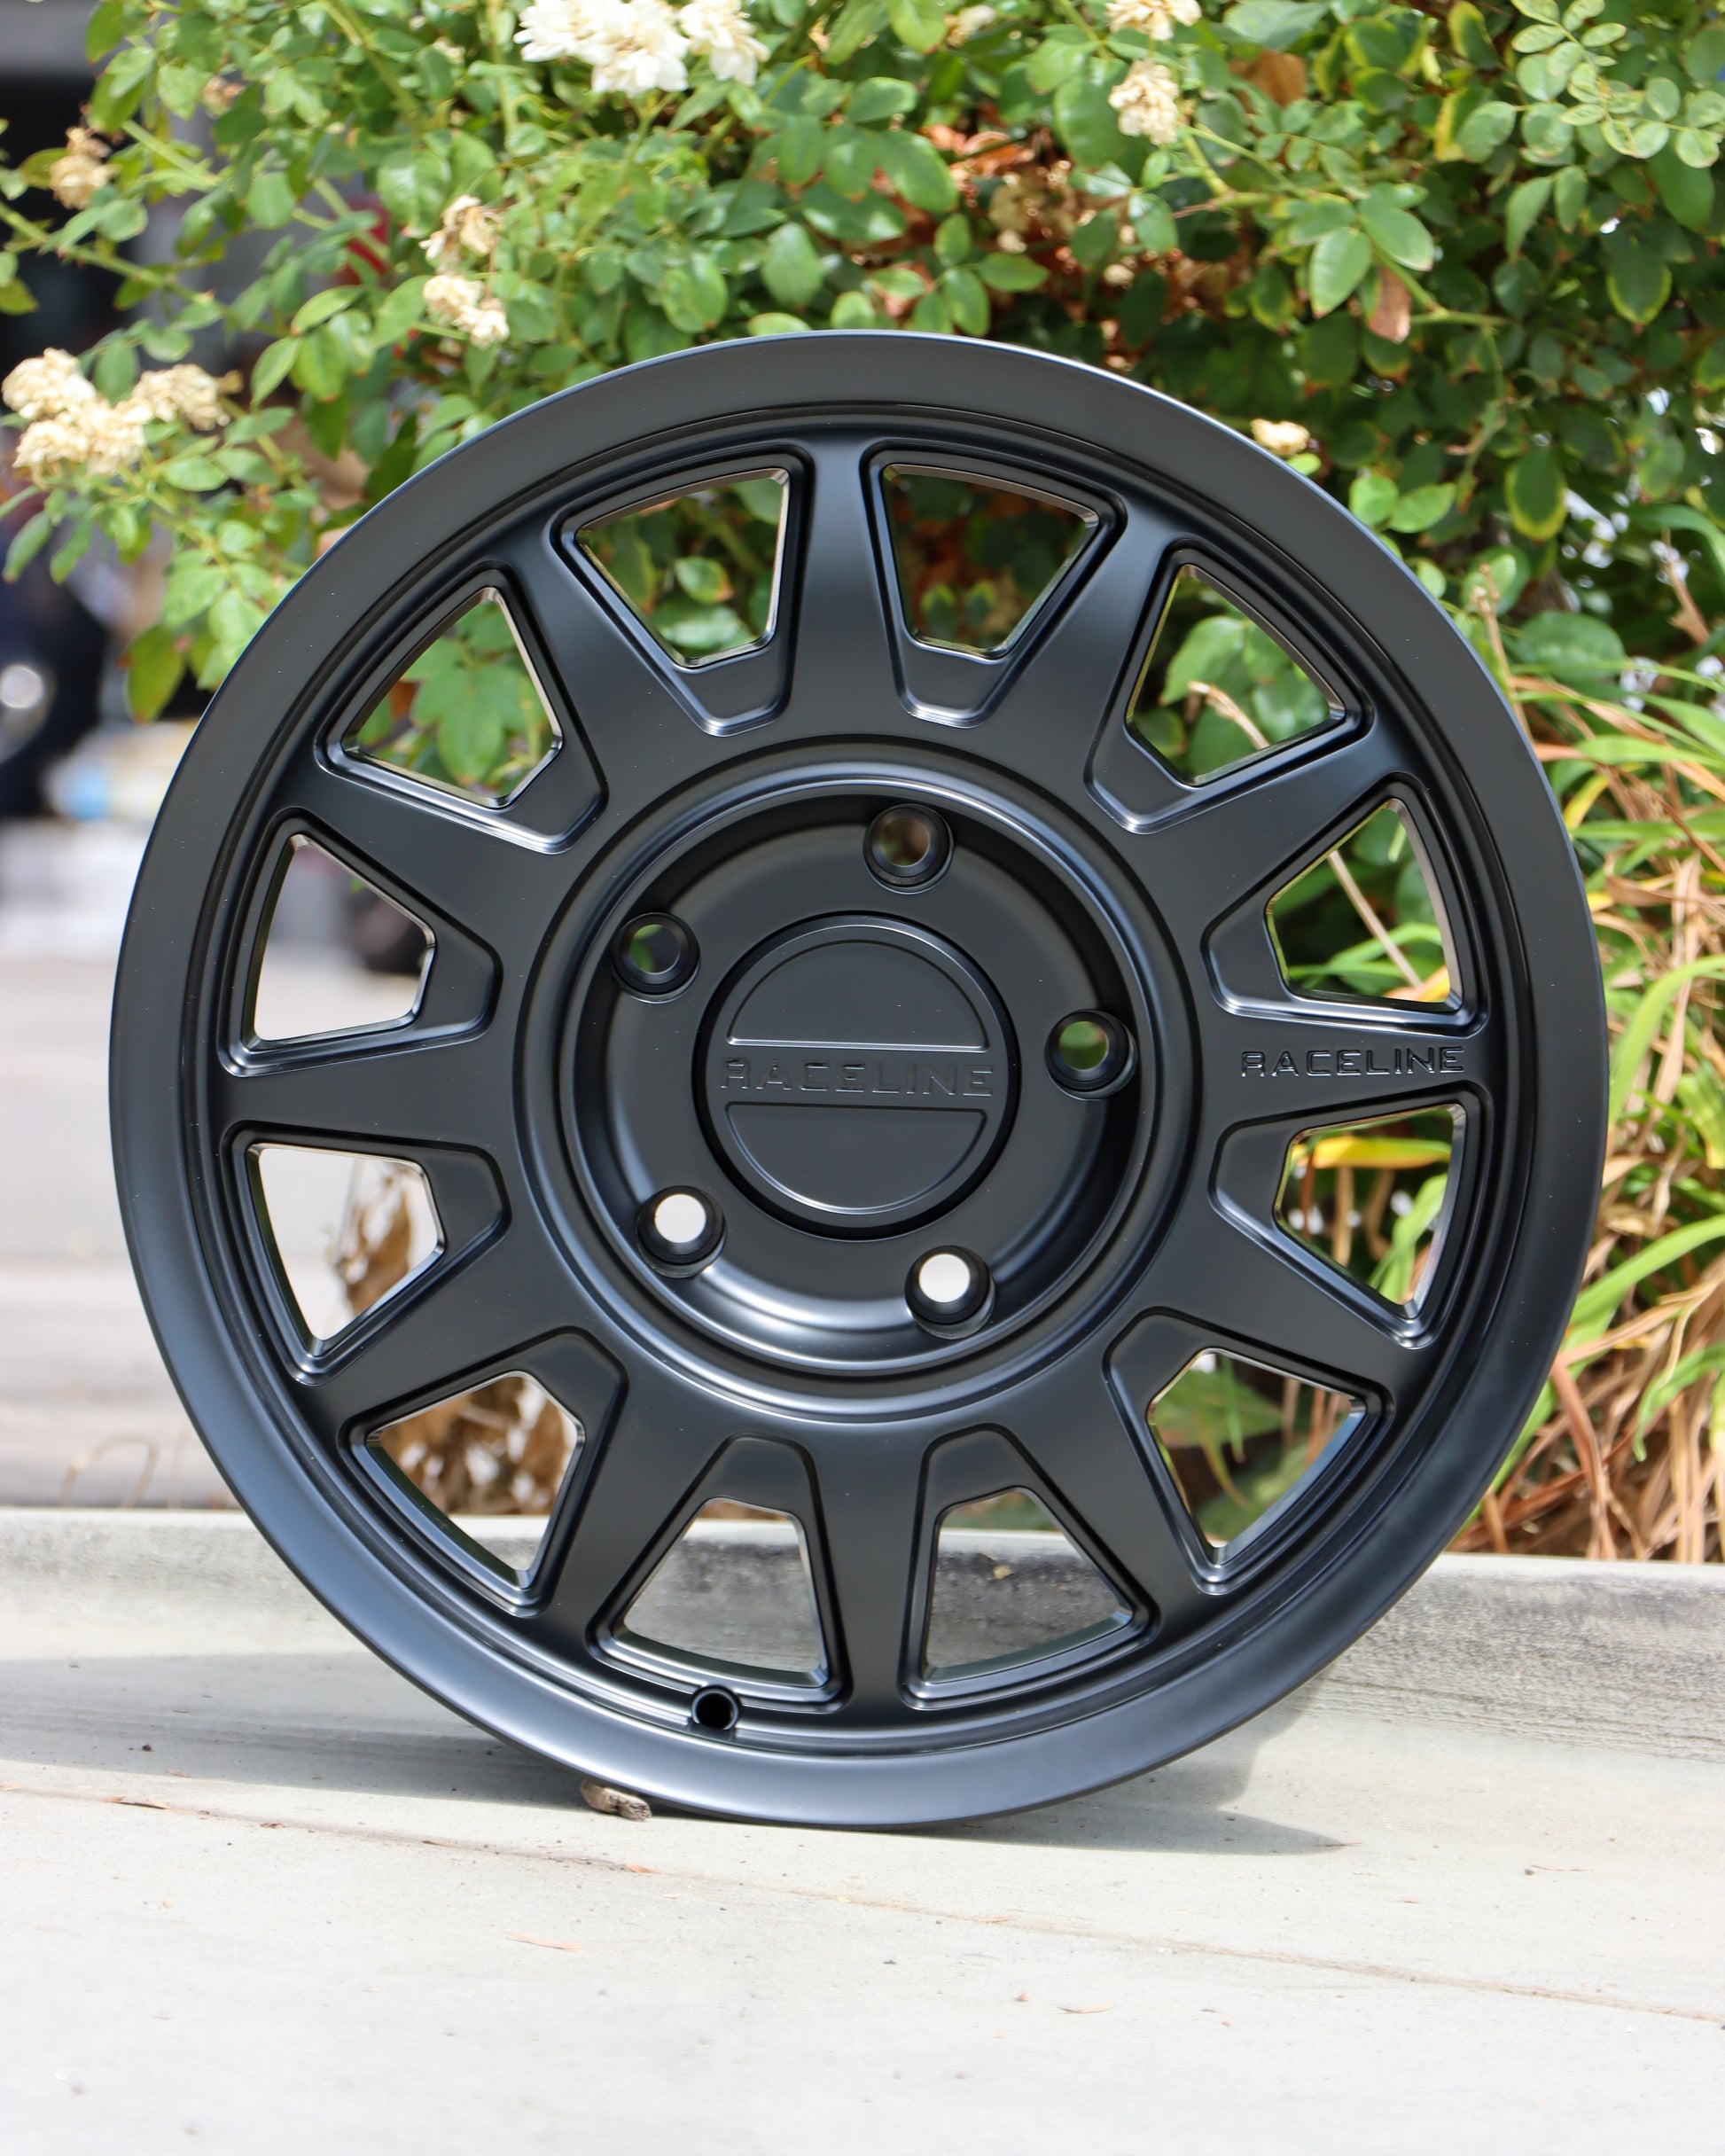 Raceline Areo wheel in a matte black finish sitting on the sidewalk with bushes in the background.